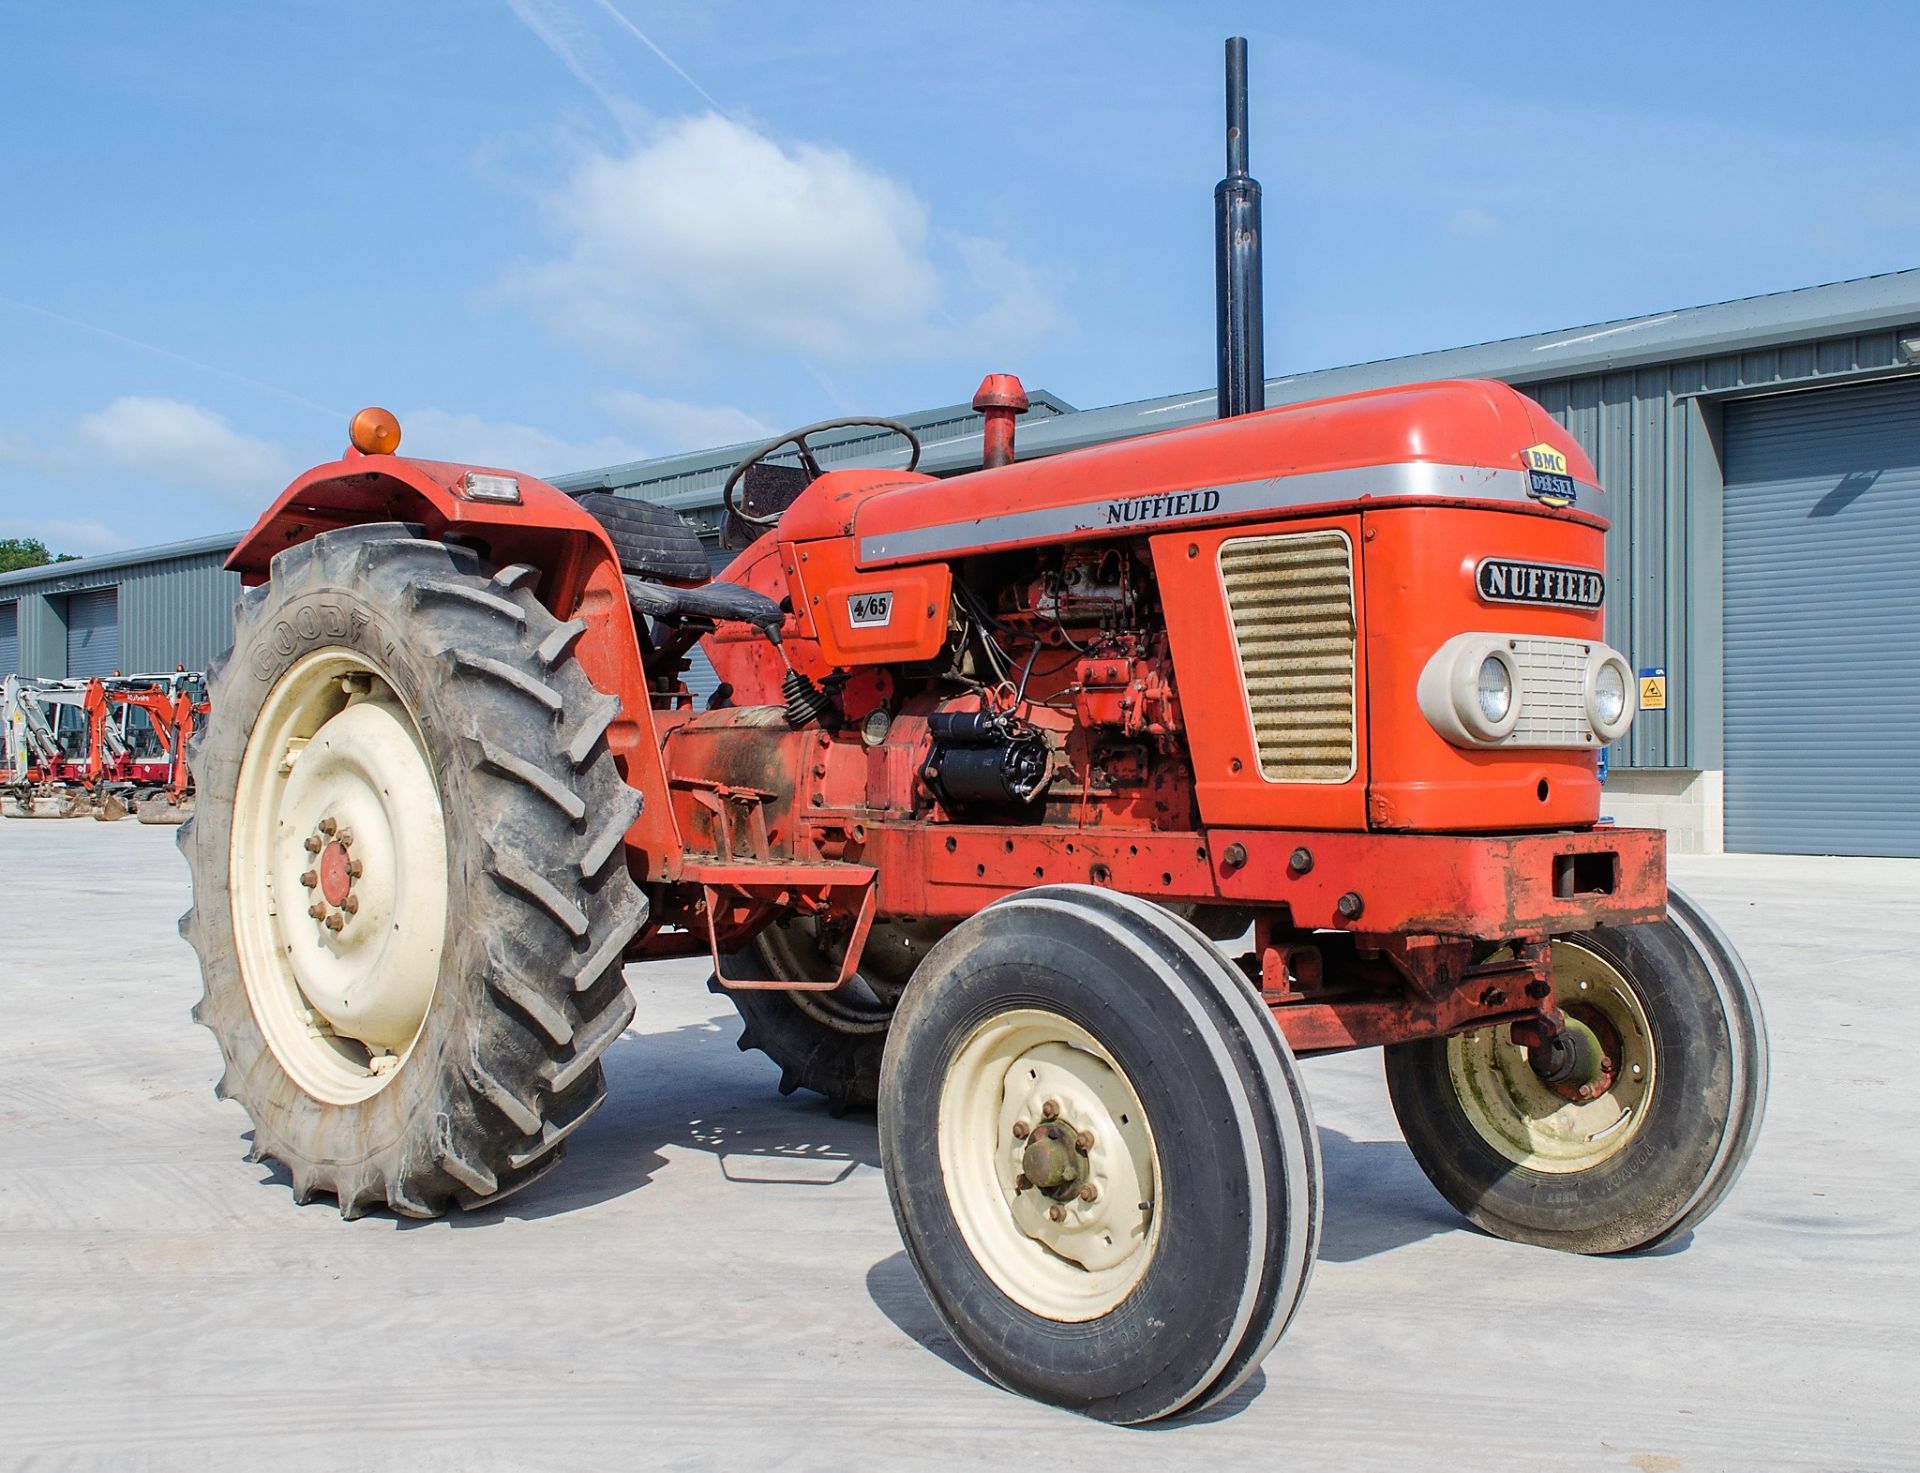 Nuffield 4/65 diesel 2WD tractor Registration Number: OSS 537G Date of Registration: 19/05/1969 - Image 2 of 18